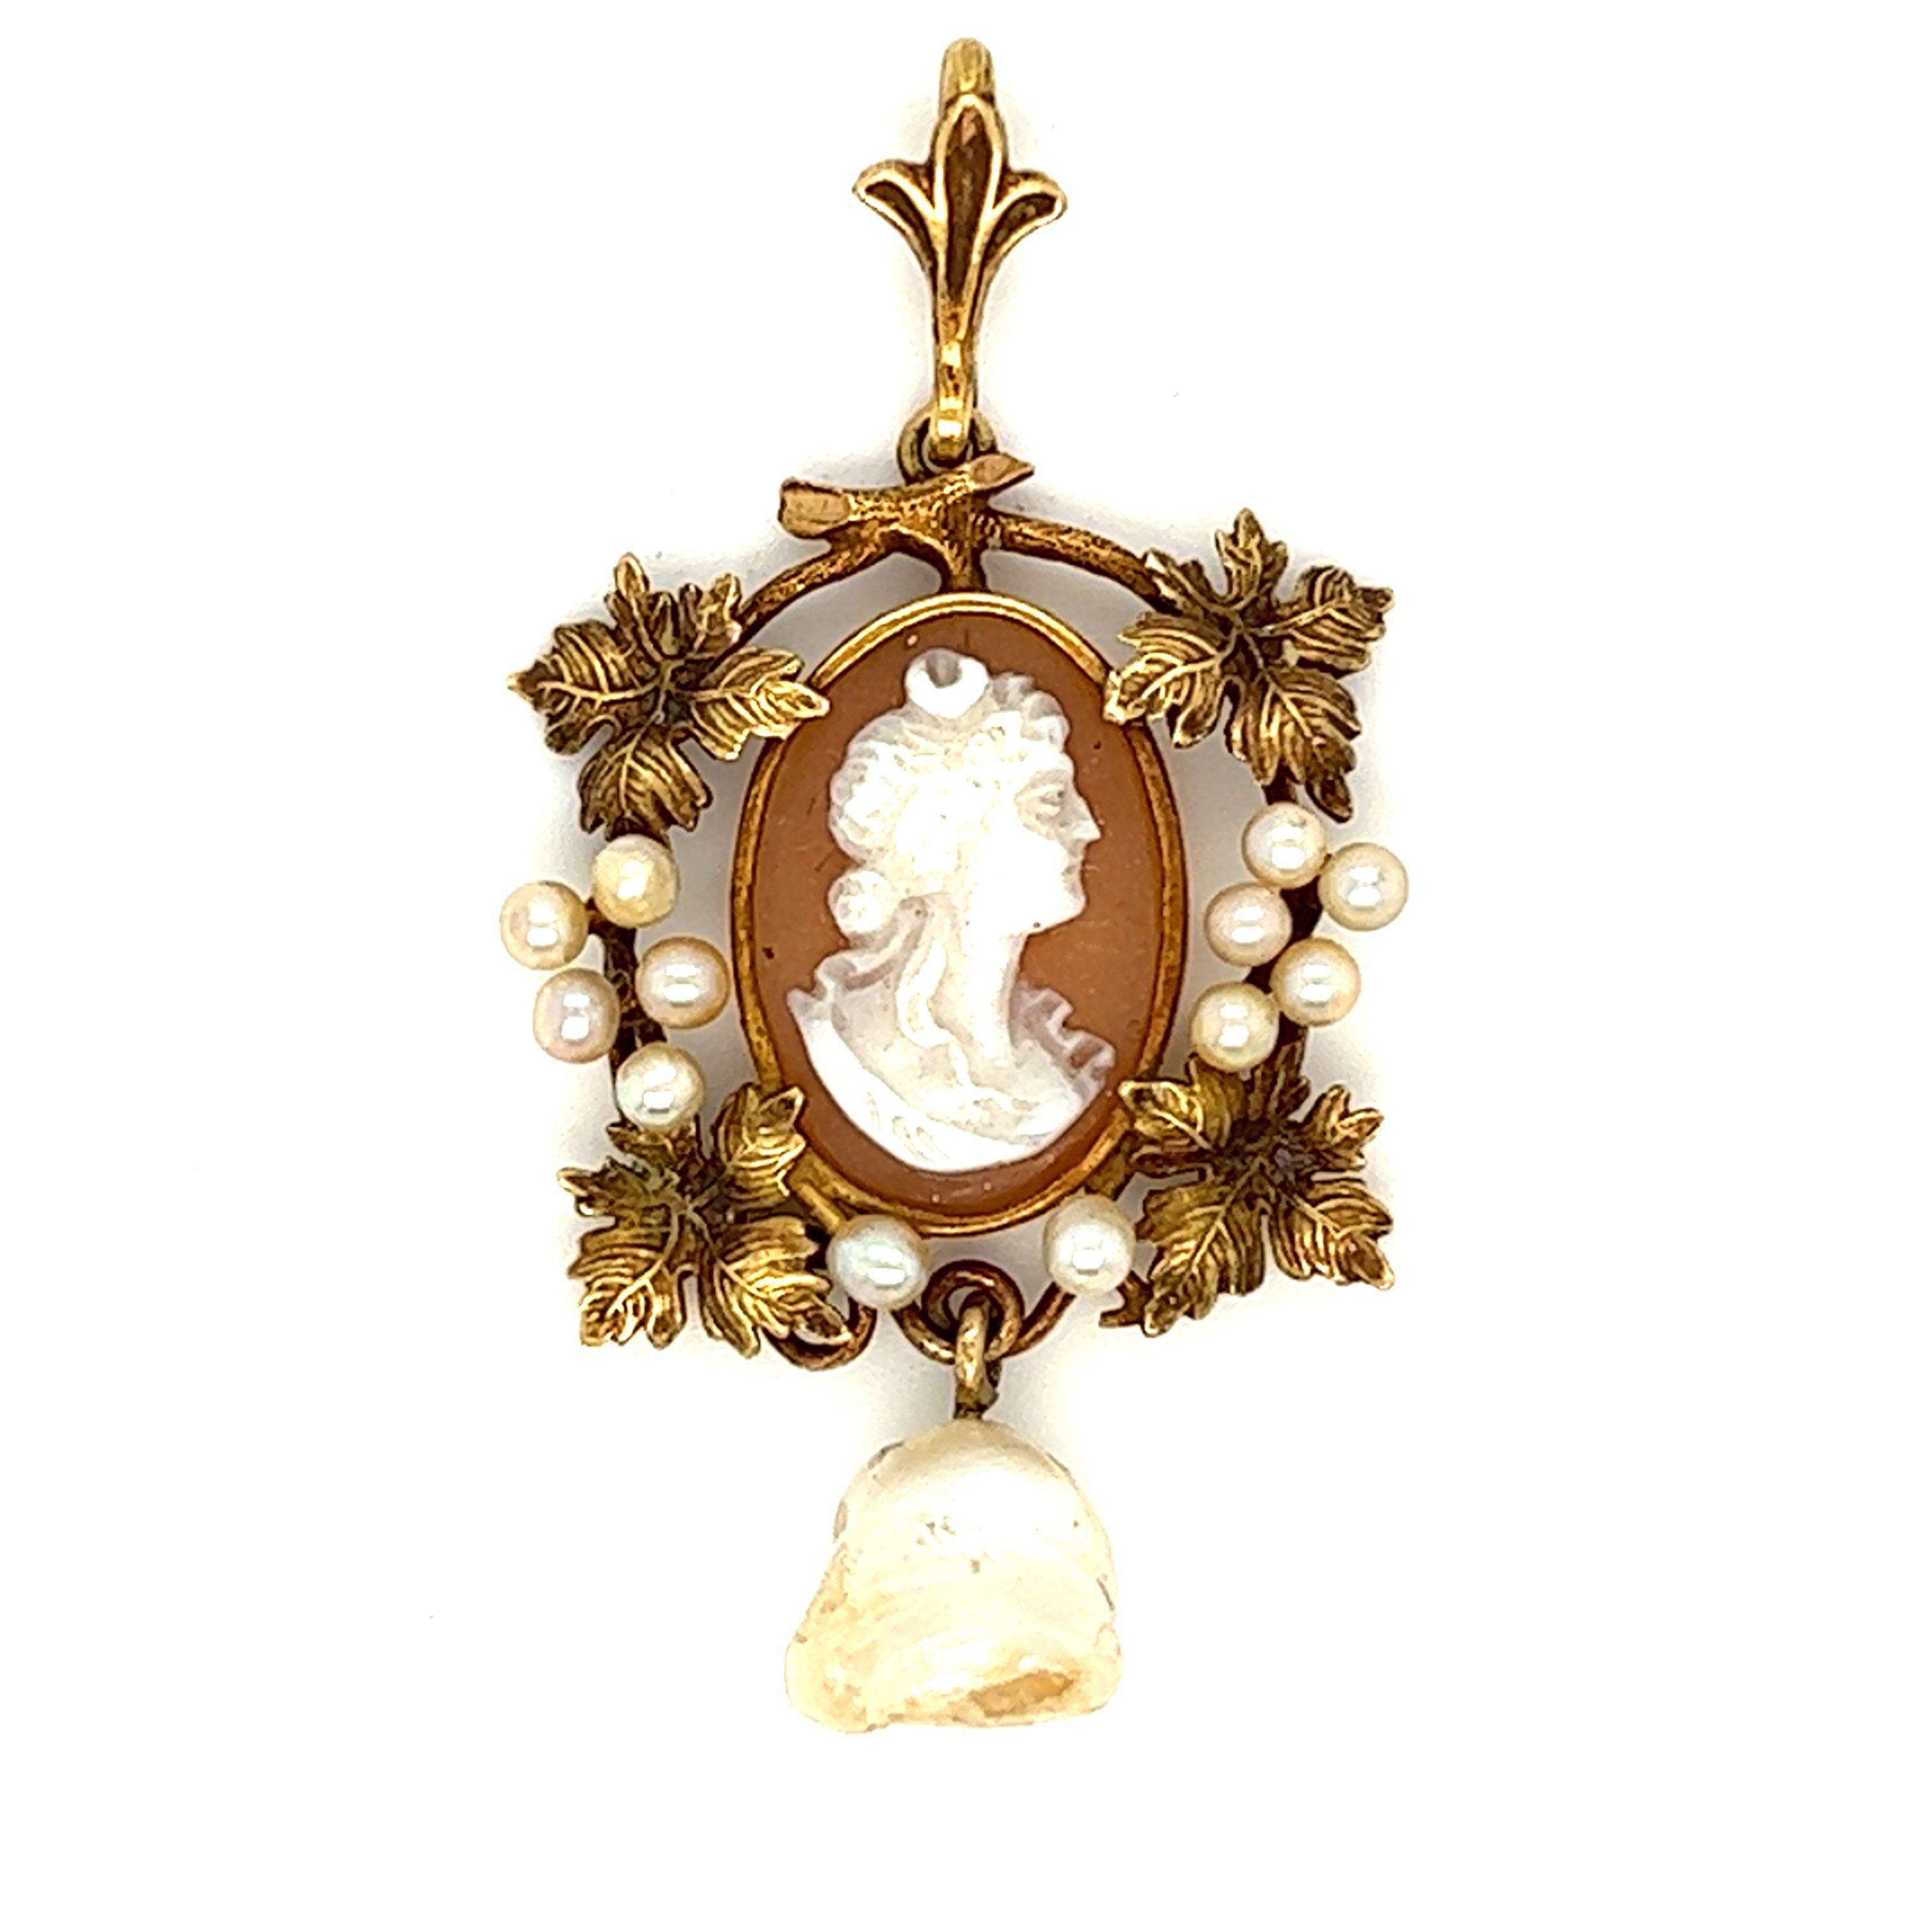 From victorian era, this lavalier cameo with beautiful silhouette of a woman features seed pearls and figural leaf and twig around the cameo. The off shape pearl dangles at bottom of the pendant.

Measurement: 3/4 x 1 1/2 inch
Gross Weight: 2.7 grams